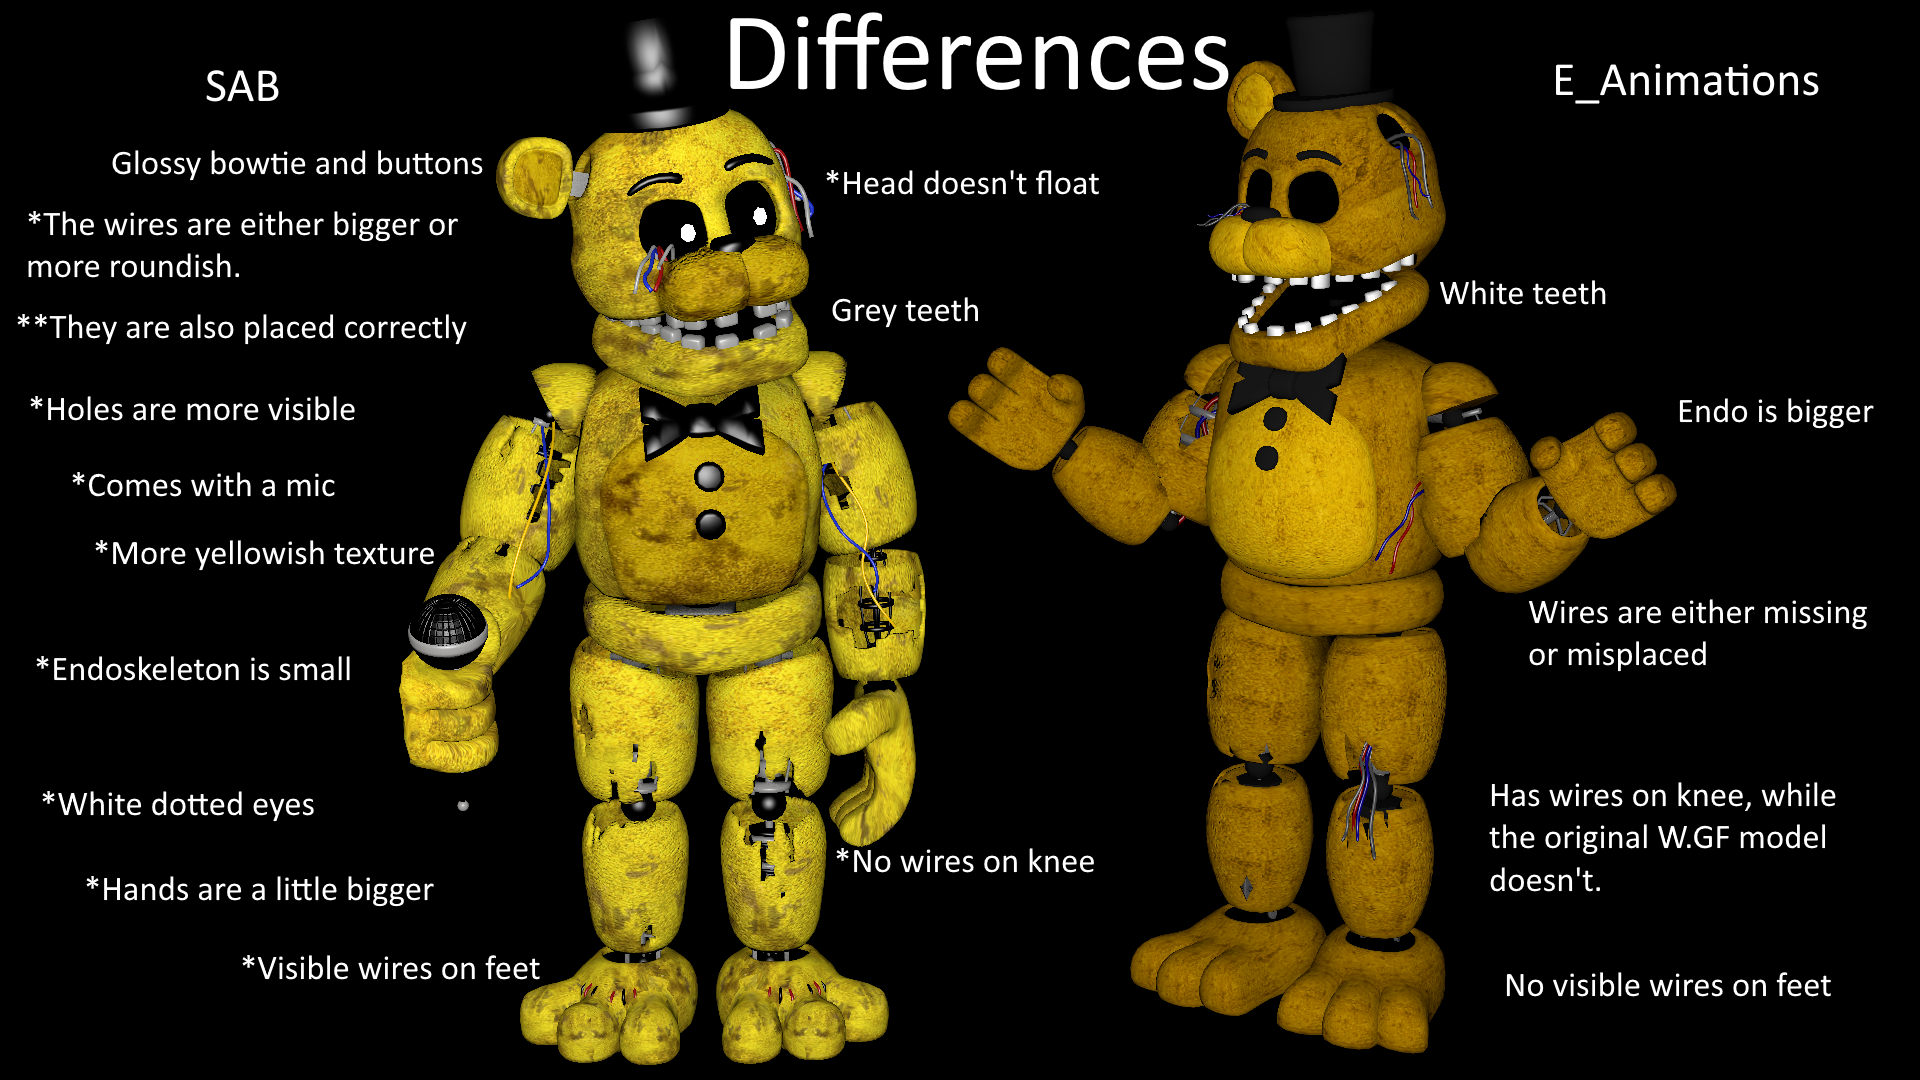 Differences between the Golden Freddy models: fivenightsatfreddys